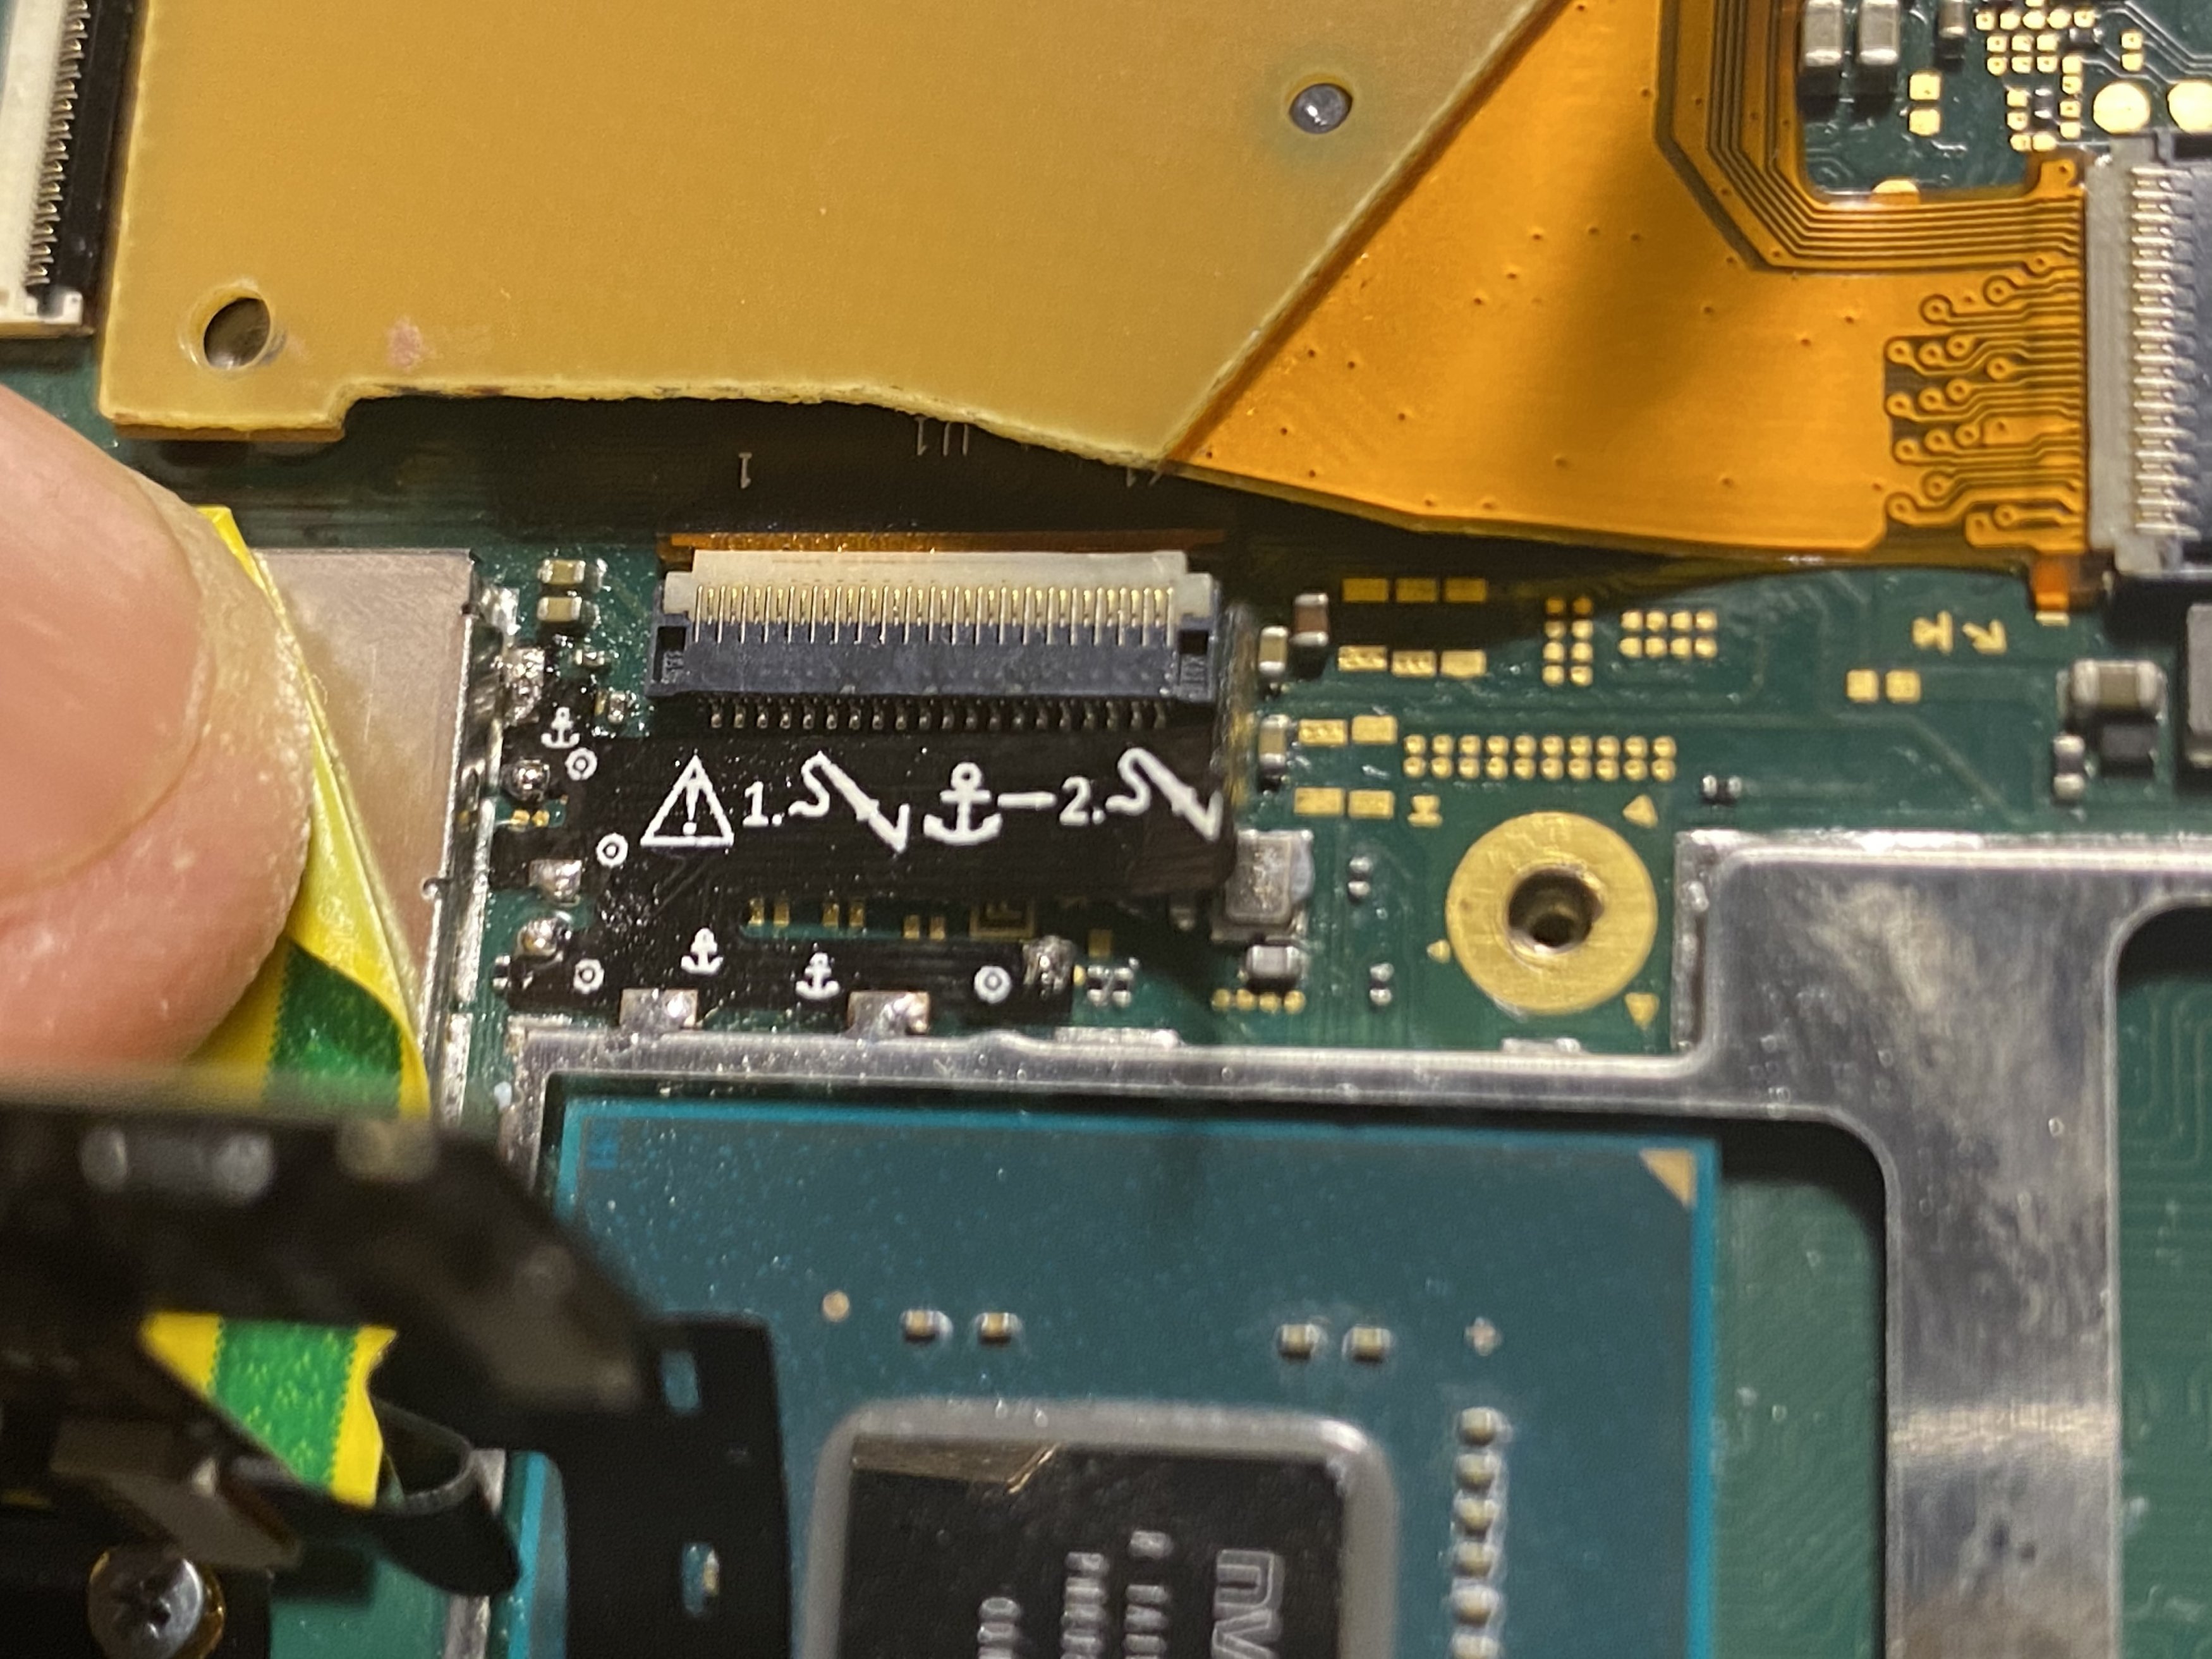 Common PCB Soldering Problems to Avoid